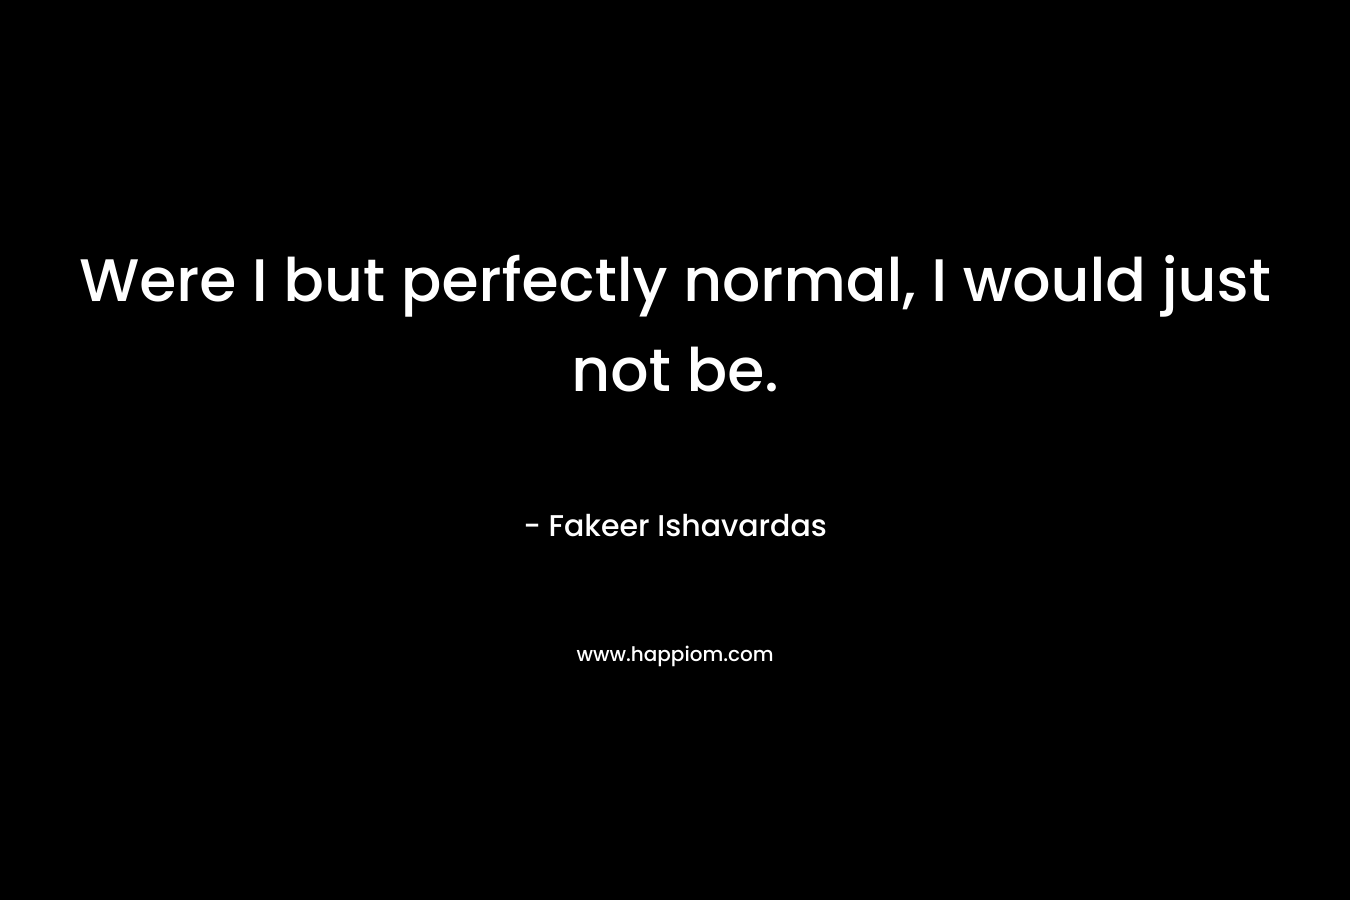 Were I but perfectly normal, I would just not be.